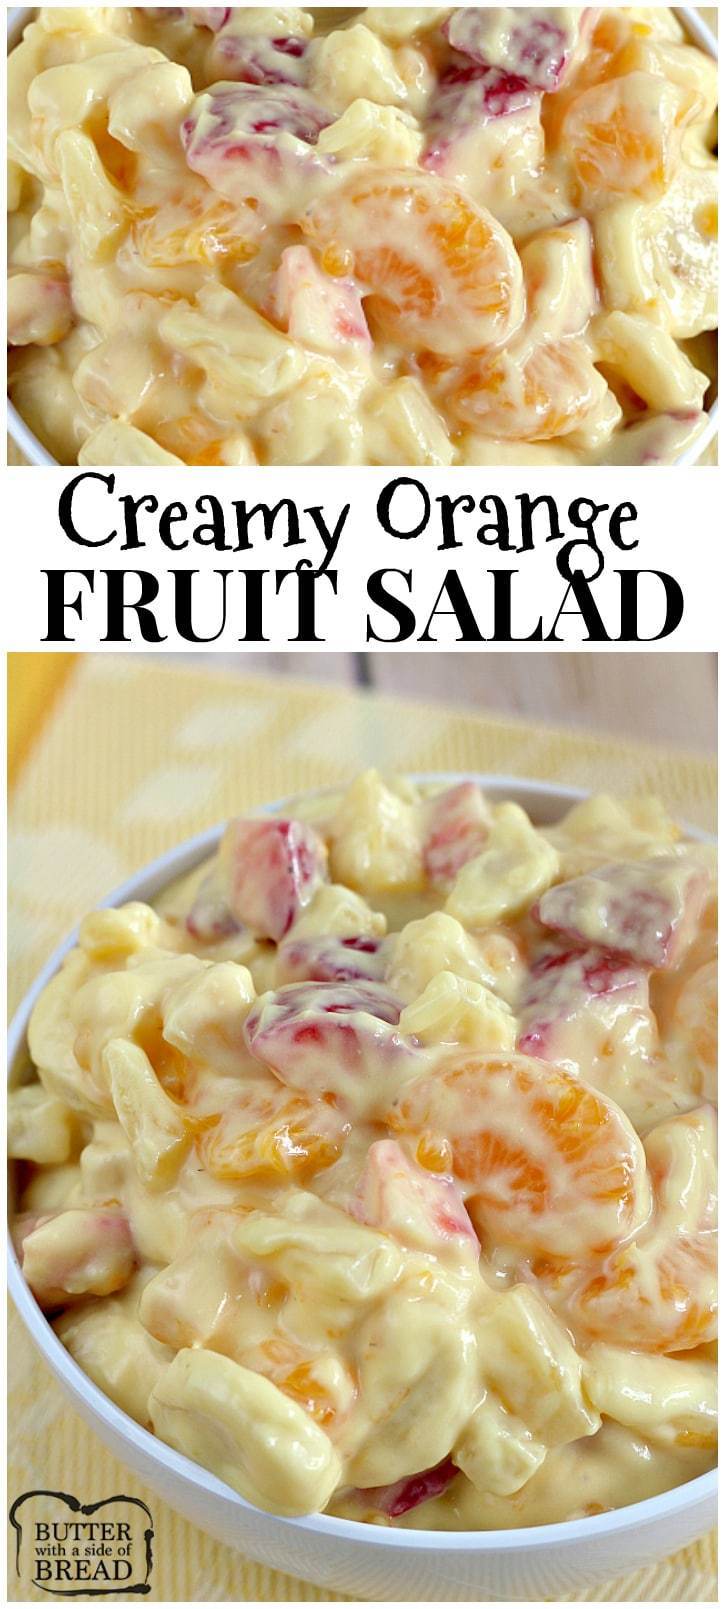 Creamy Orange Fruit Salad only takes minutes to make, has the most delicious orange flavor and is the perfect side dish to take to a party or potluck!